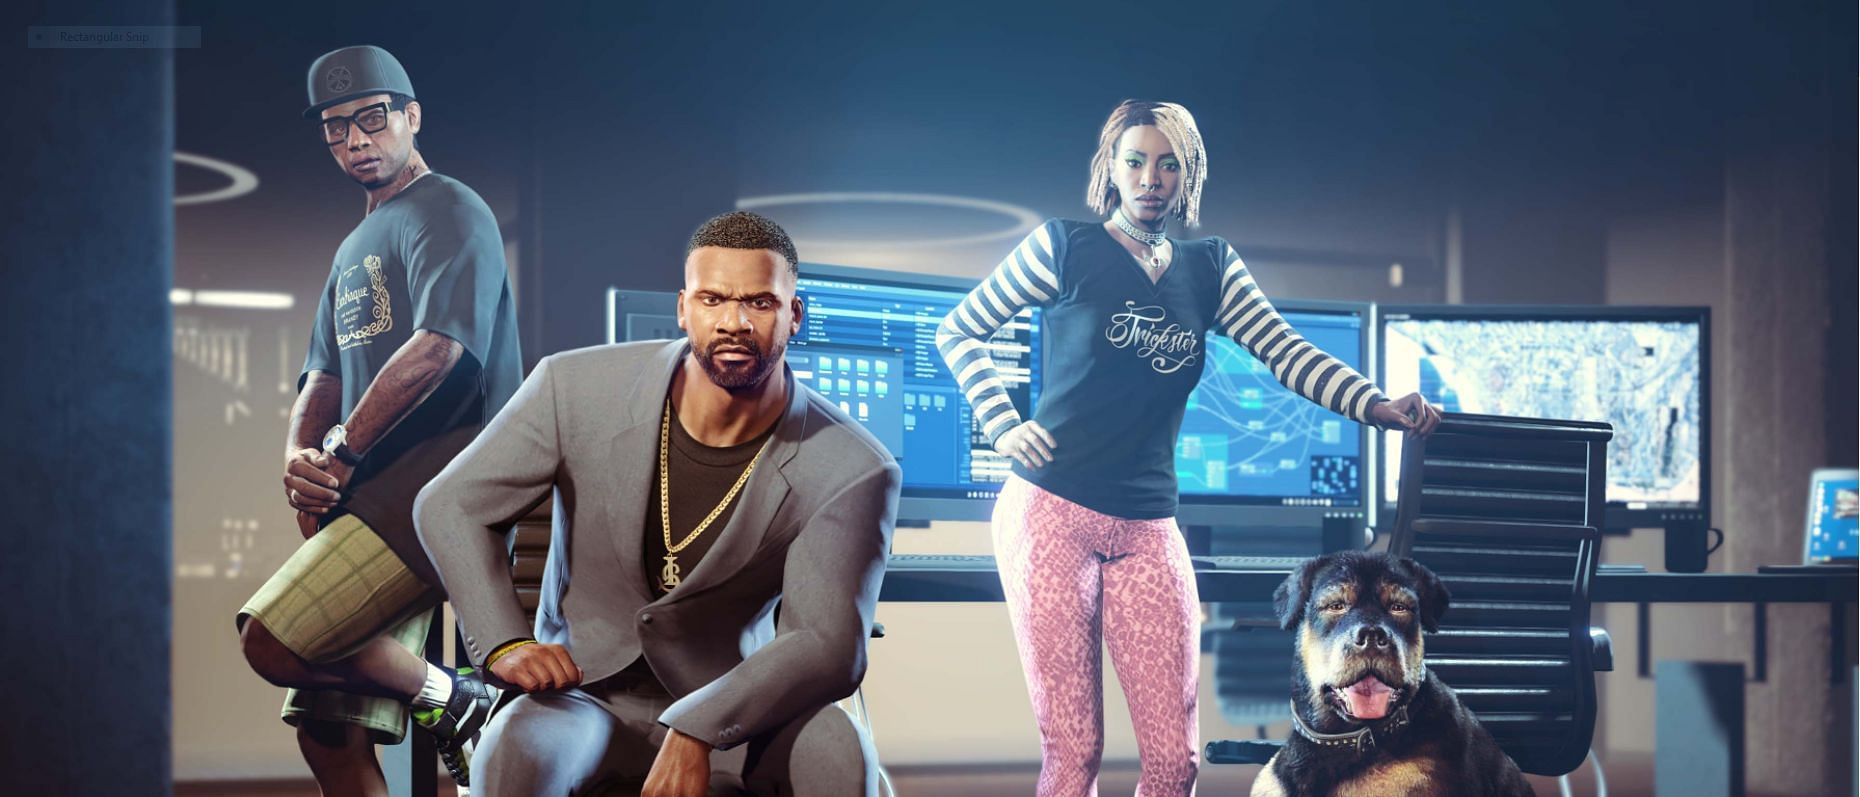 The Contract DLC brings Franklin into the world of GTA Online